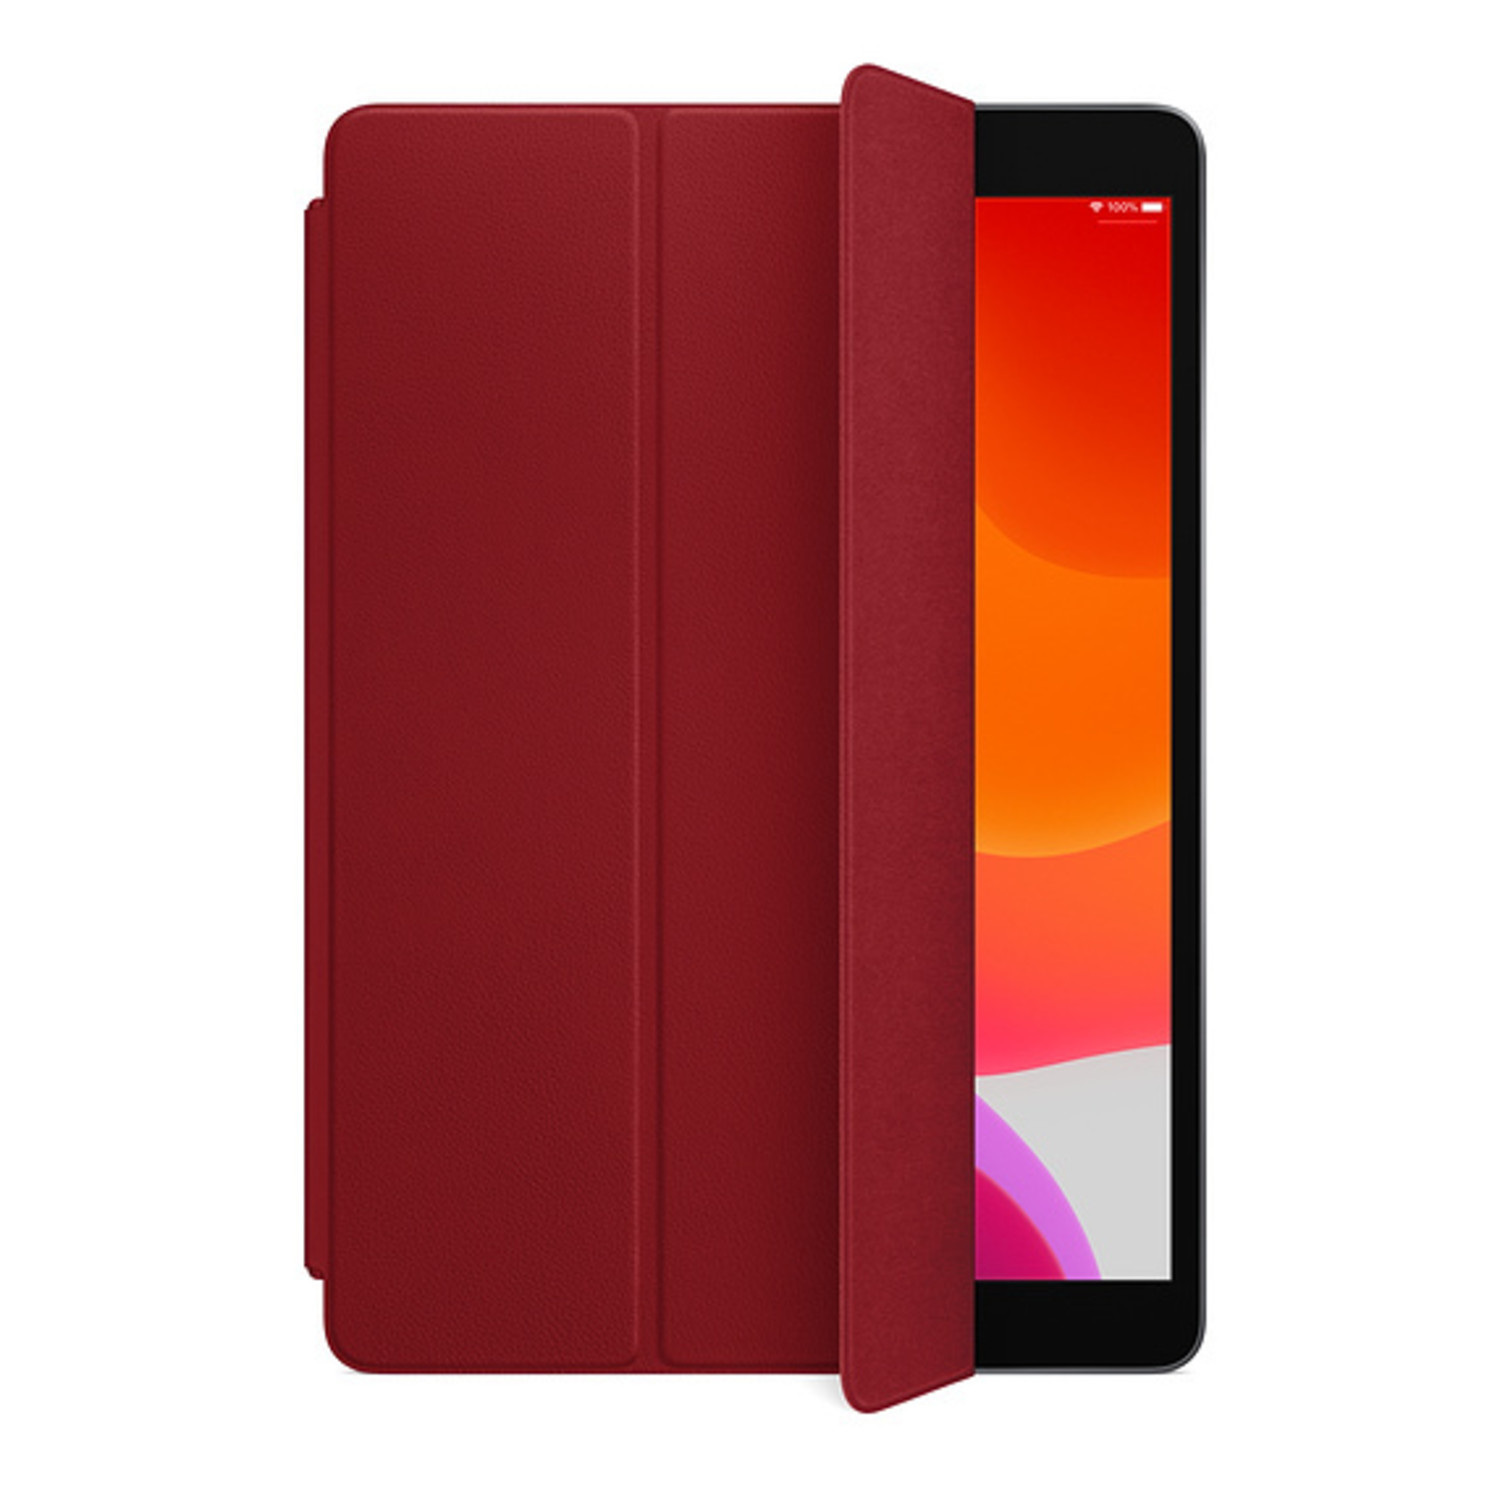 Leather Smart Cover for iPad (7th generation) and iPad Air (3rd generation)  - kite+key, Rutgers Tech Store